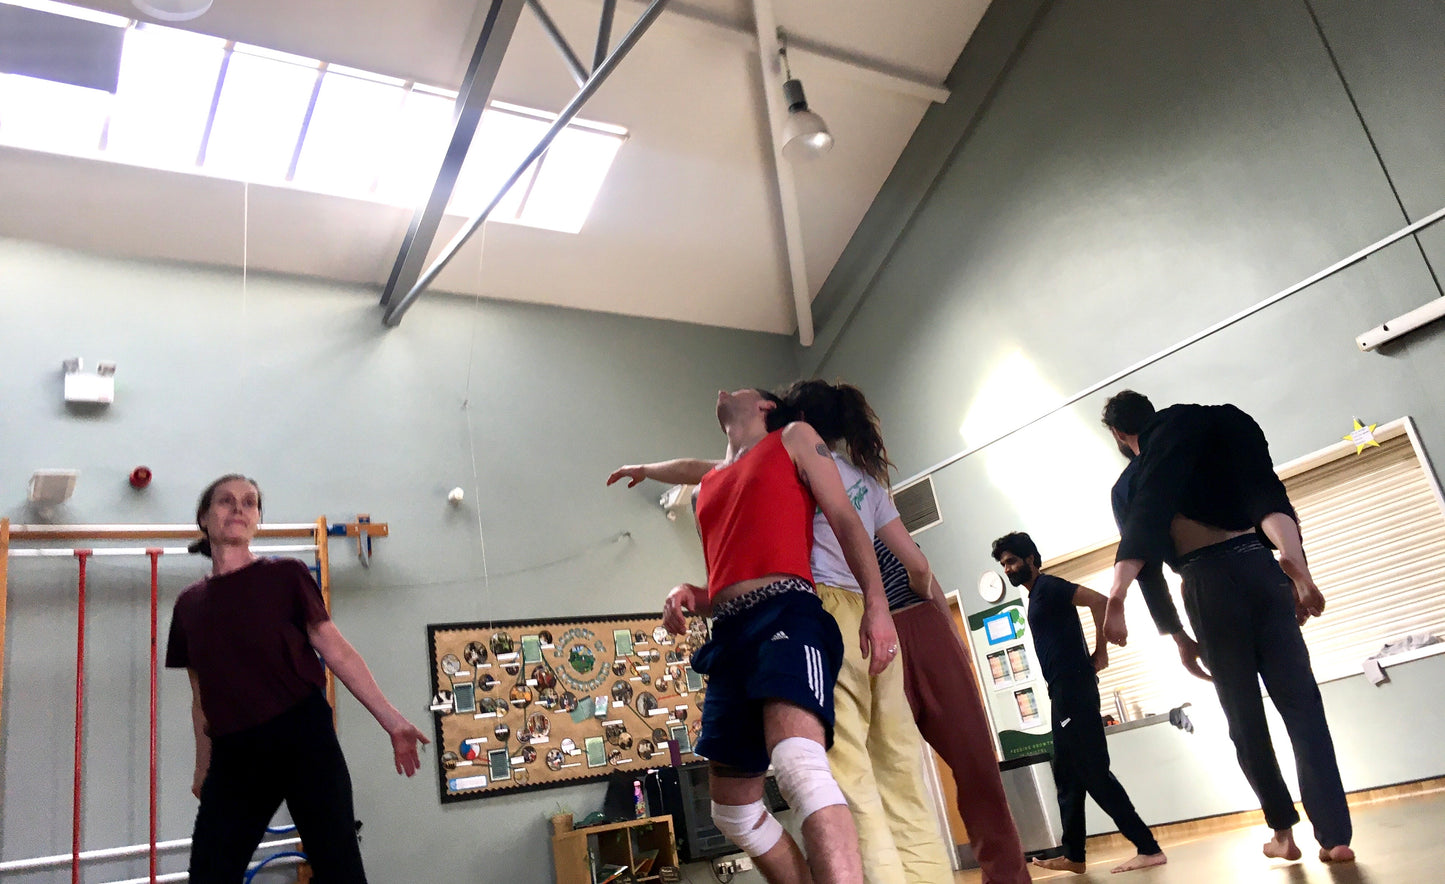 Contact Improvisation, The Underscore and Being Ready to Dance